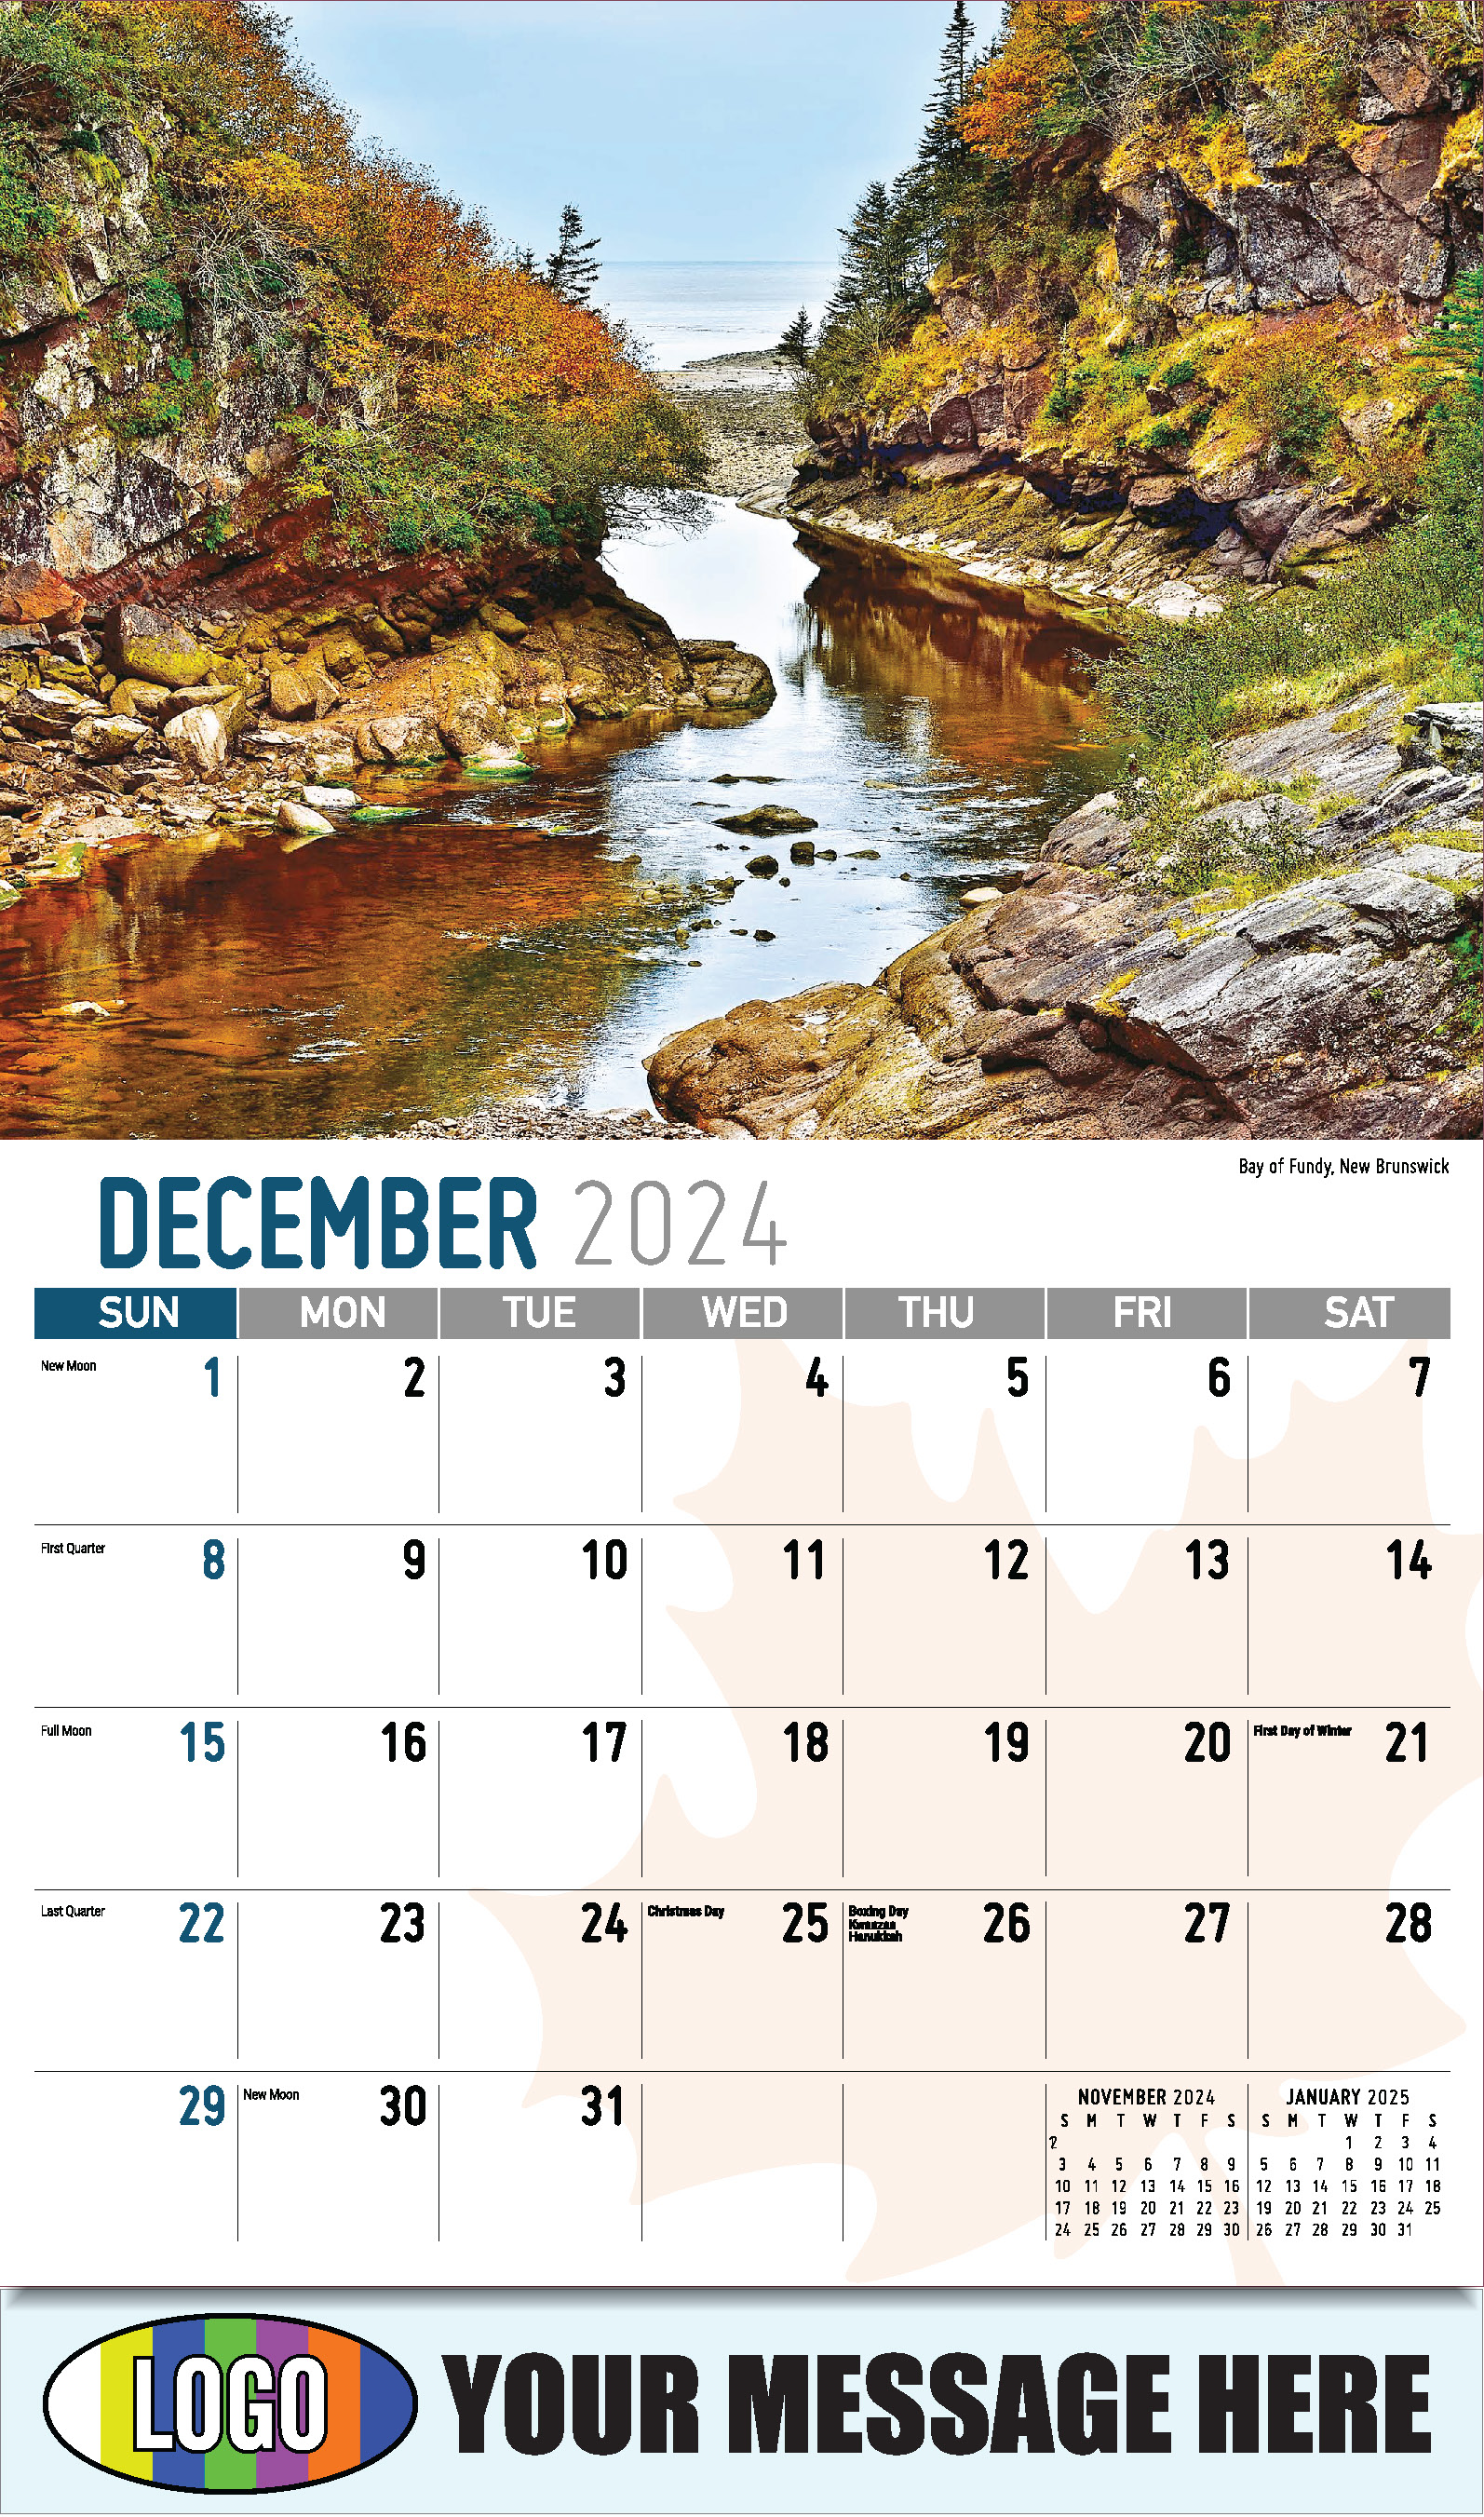 Scenes of Canada 2025 Business Promotion Wall Calendar - December_a